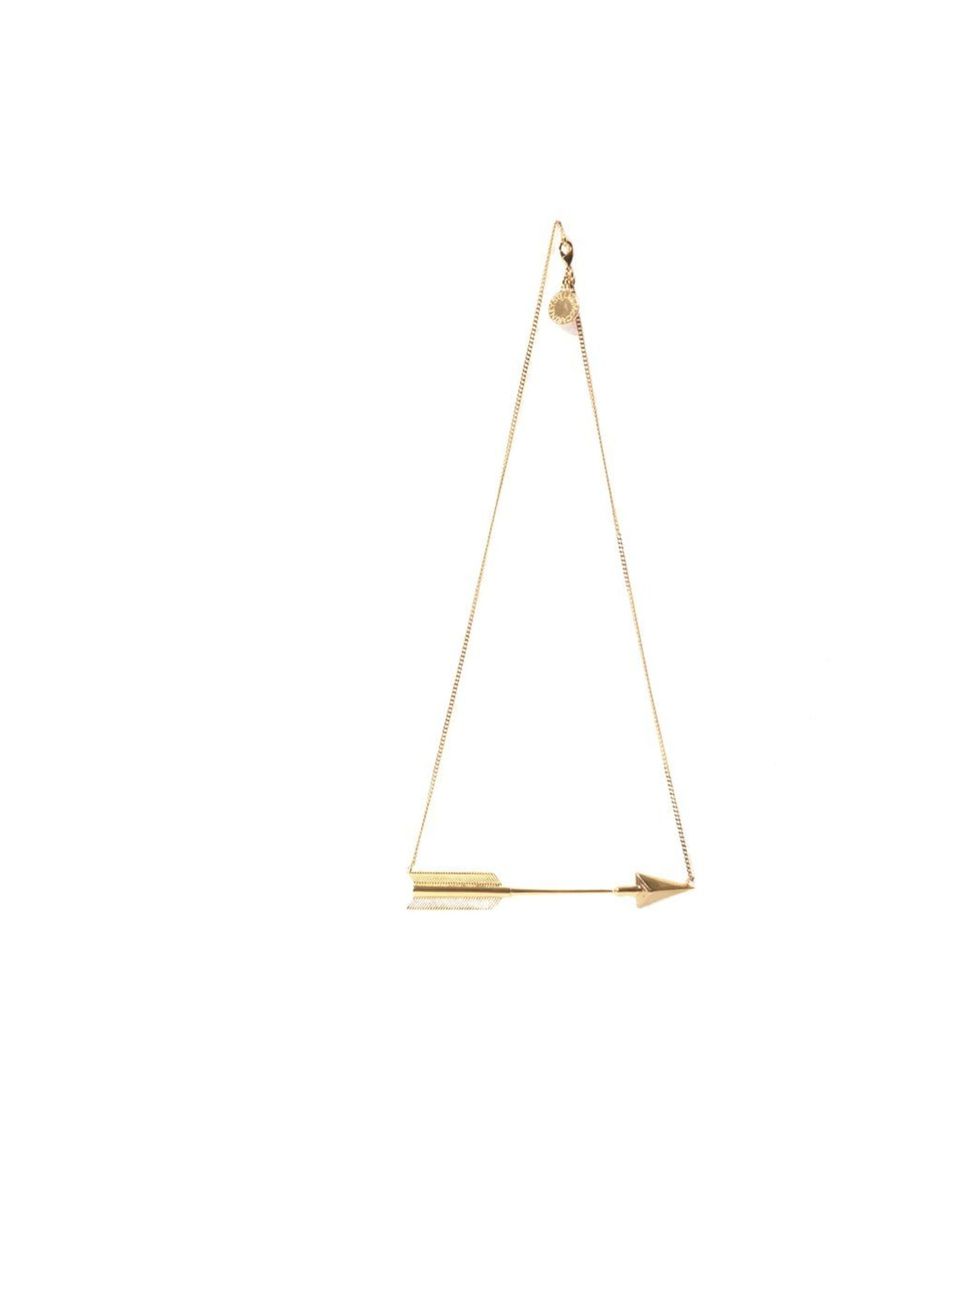 <p>Stella McCartney arrow necklace, £250, at <a href="http://www.matchesfashion.com/product/127530">Matches Fashion</a></p>